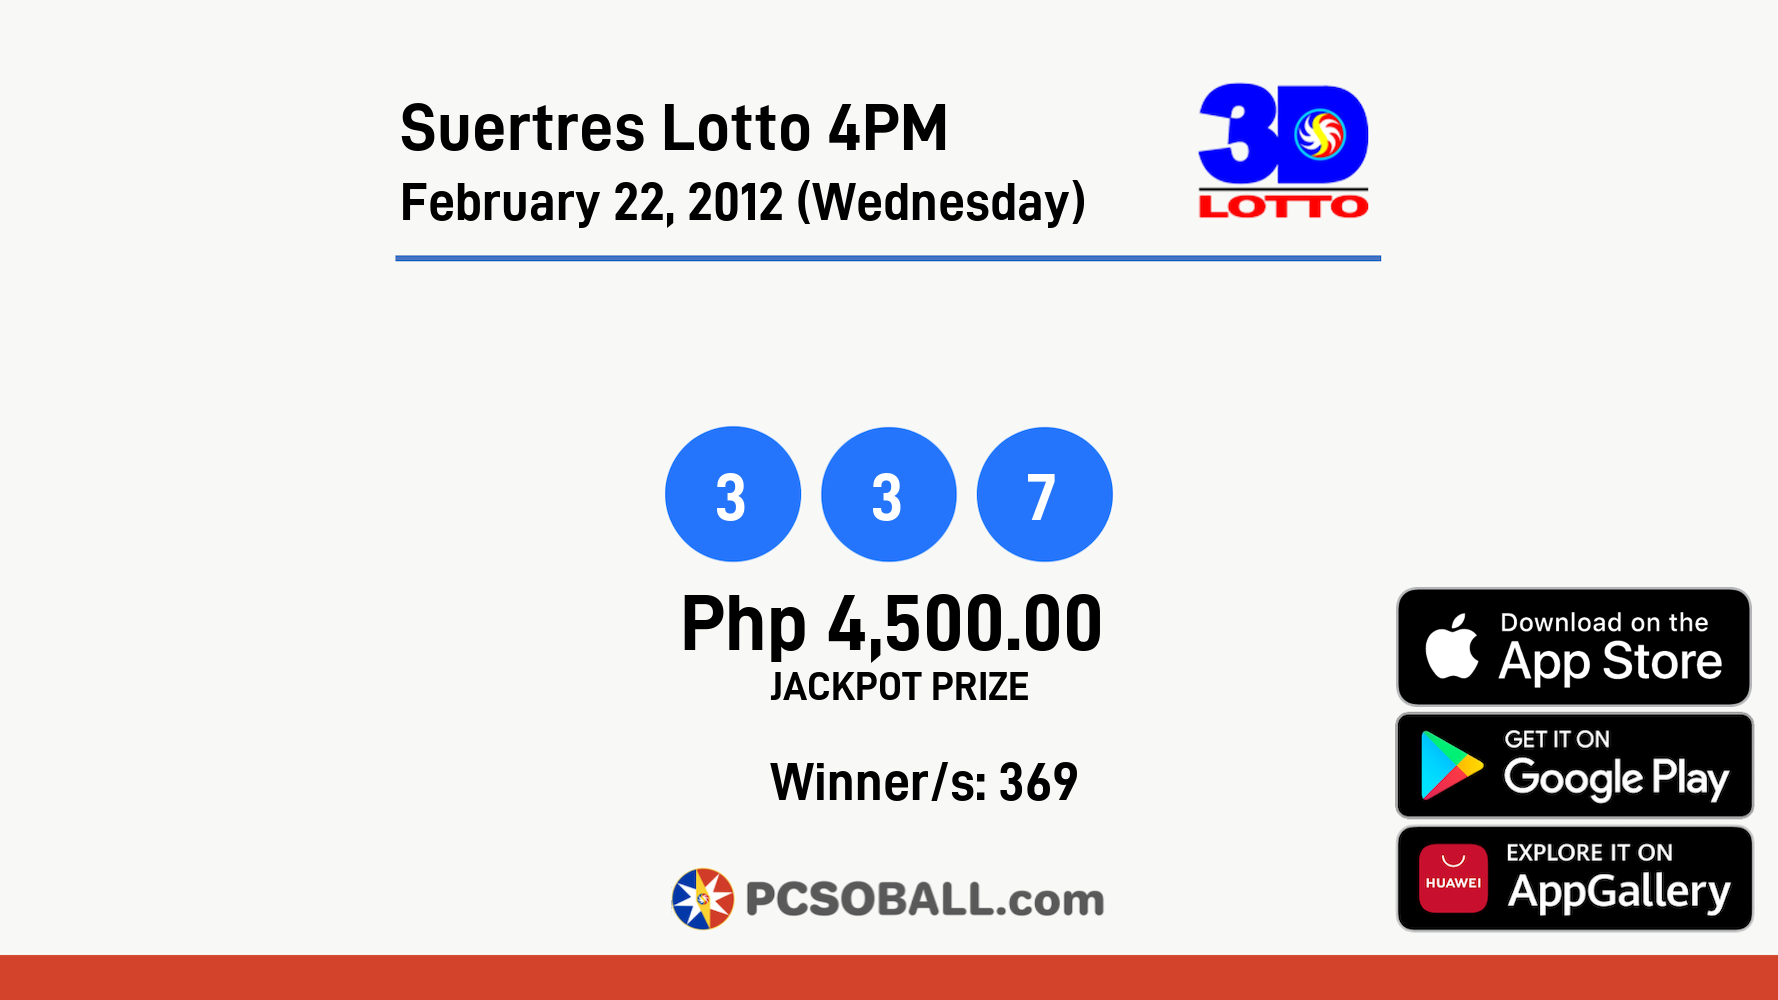 Suertres Lotto 4PM February 22, 2012 (Wednesday) Result